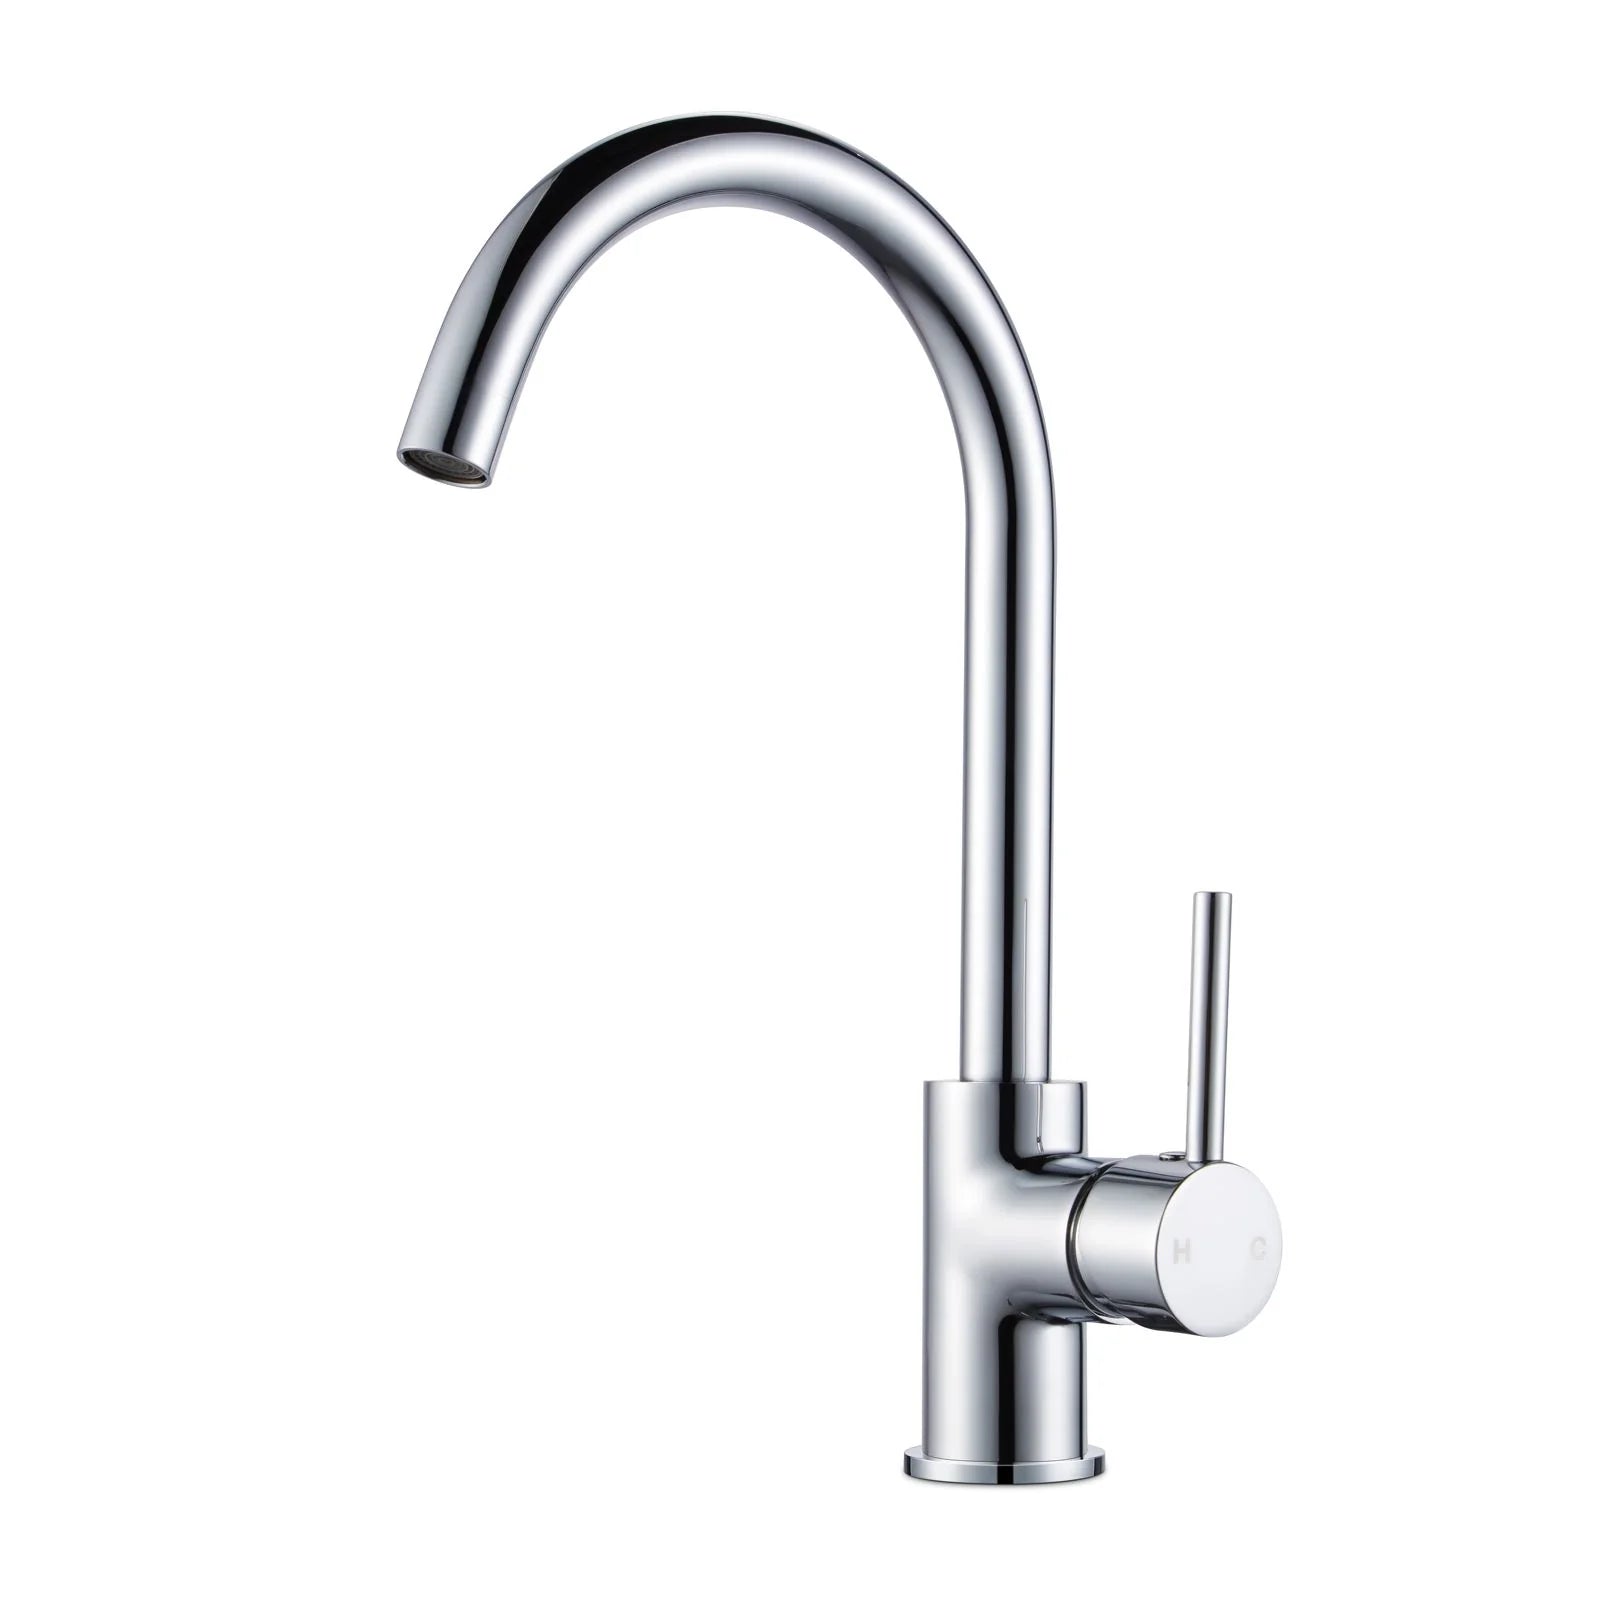 Round Standard Kitchen Sink Mixer Tap: Classic and practical addition to your kitchen setup-CH1026.KM